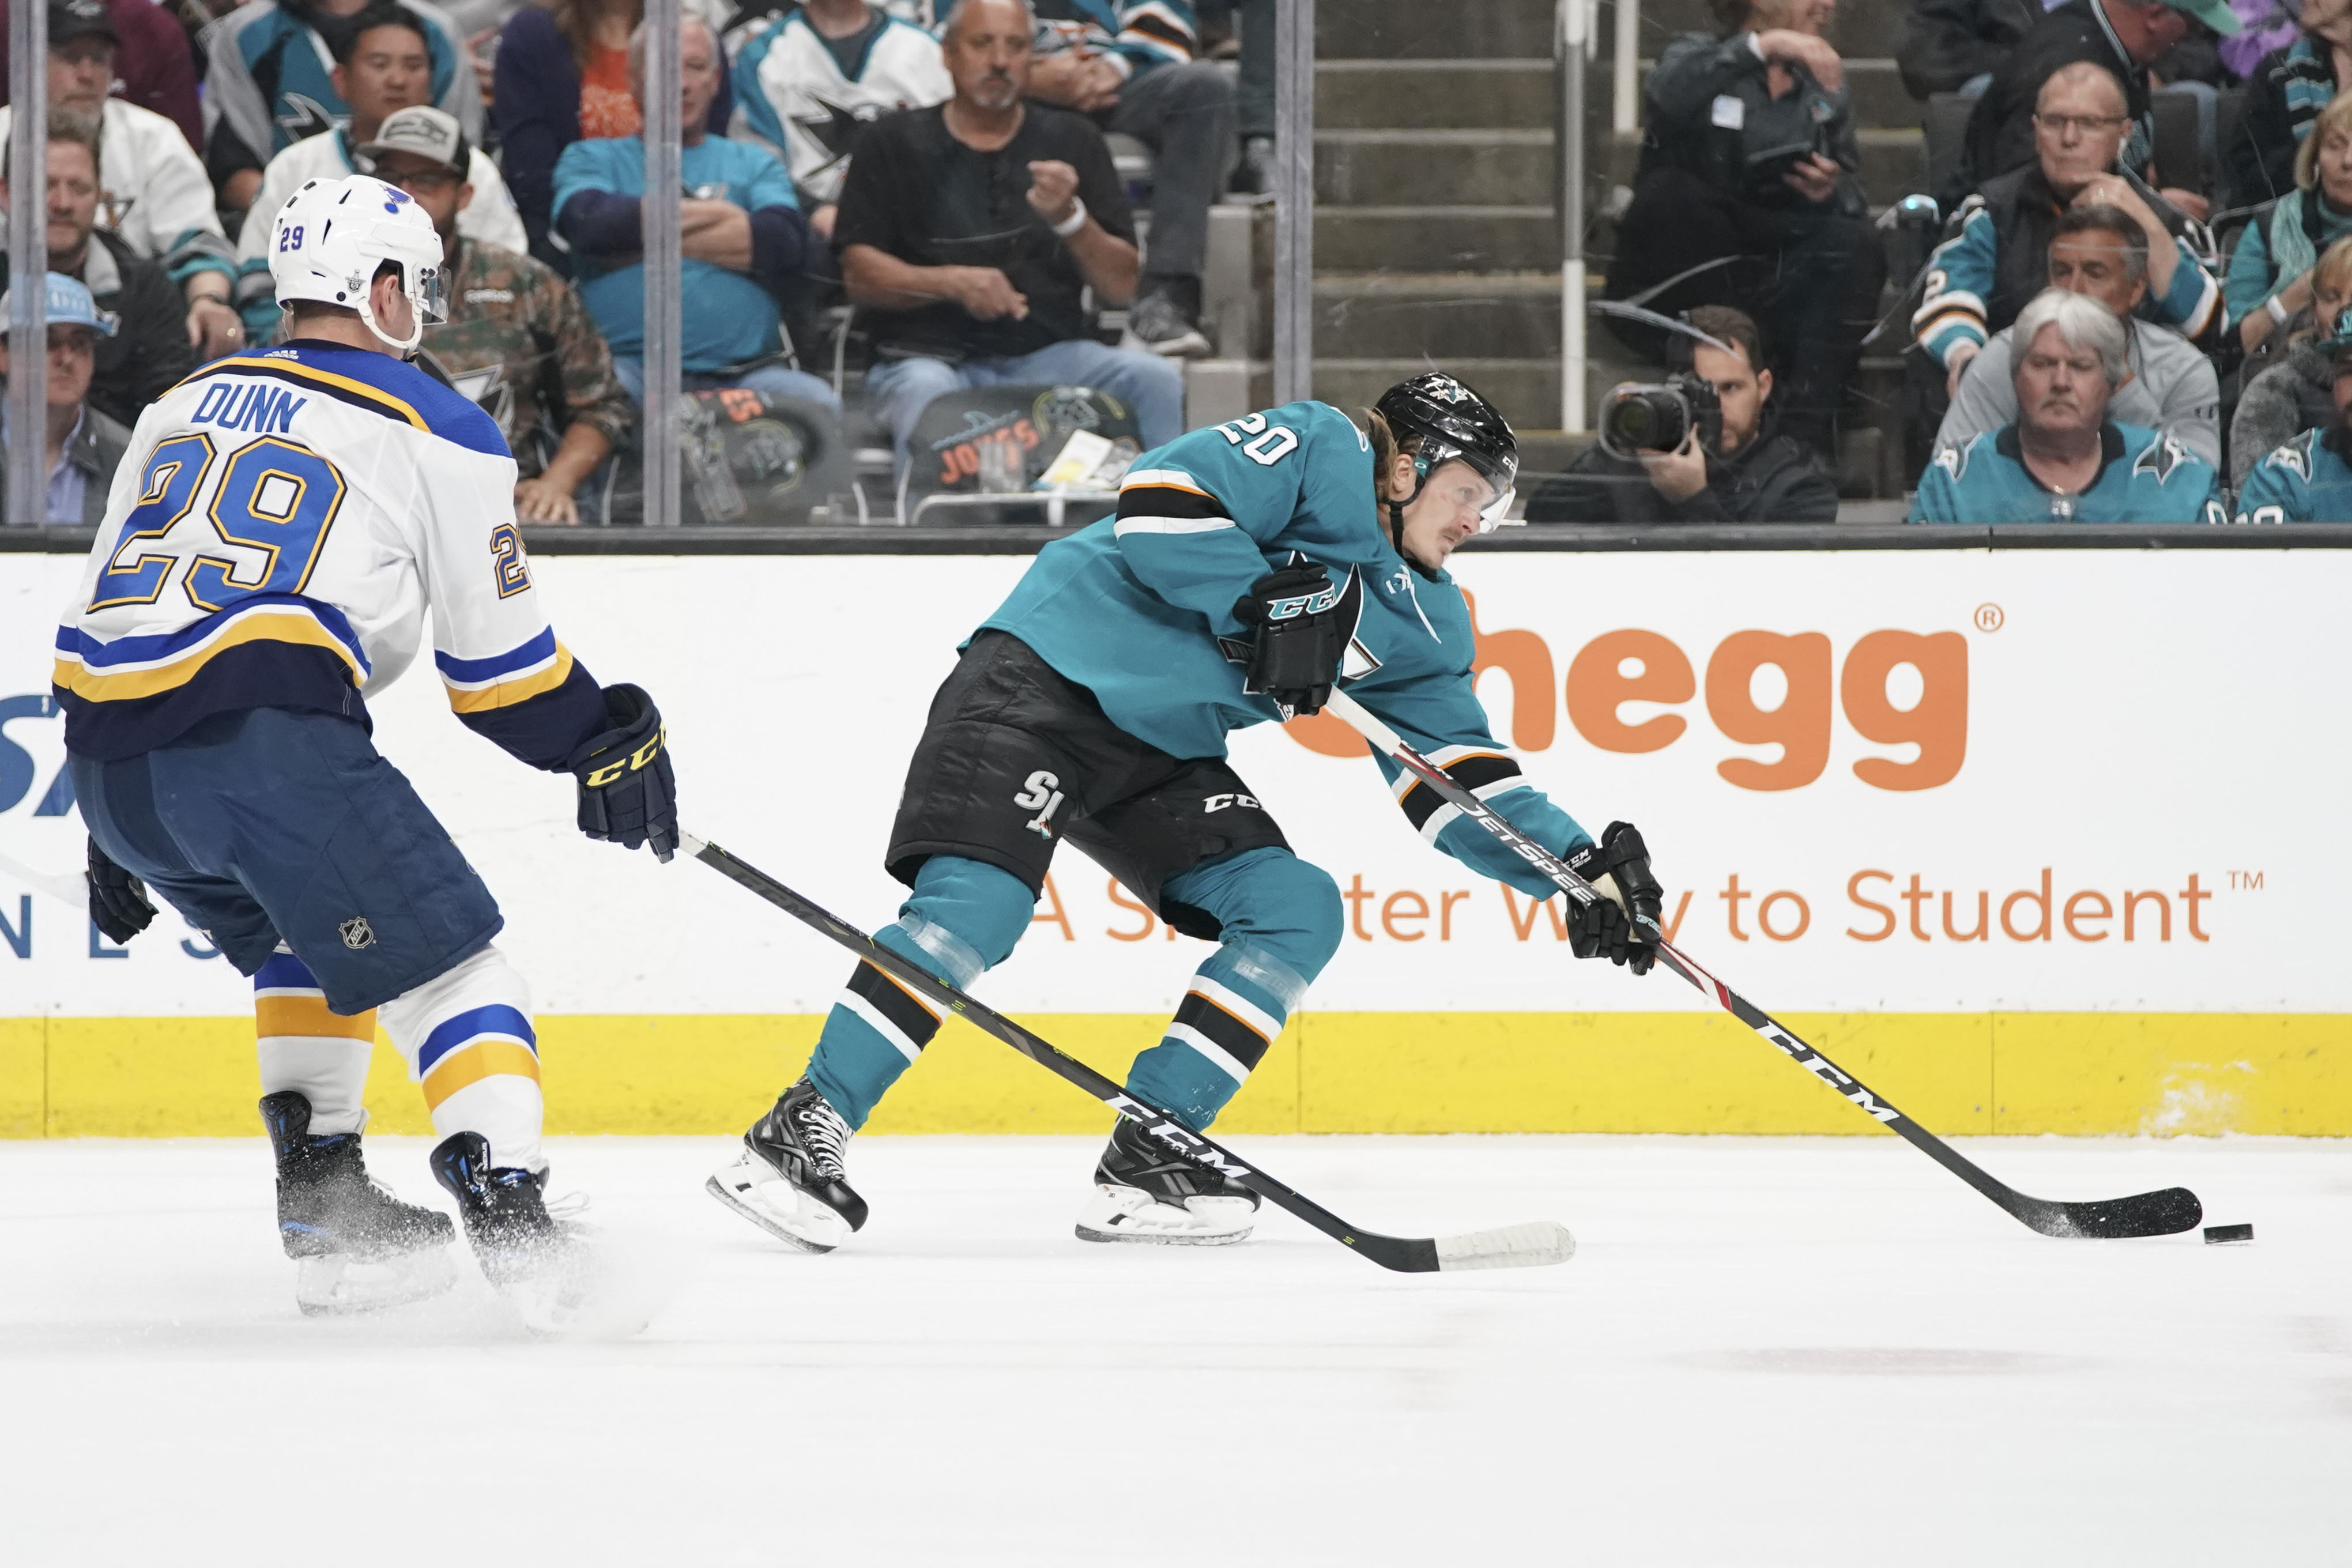 2019-05-12T010900Z_1444794112_NOCID_RTRMADP_3_NHL-STANLEY-CUP-PLAYOFFS-ST-LOUIS-BLUES-AT-SAN-JOSE-SHARKS